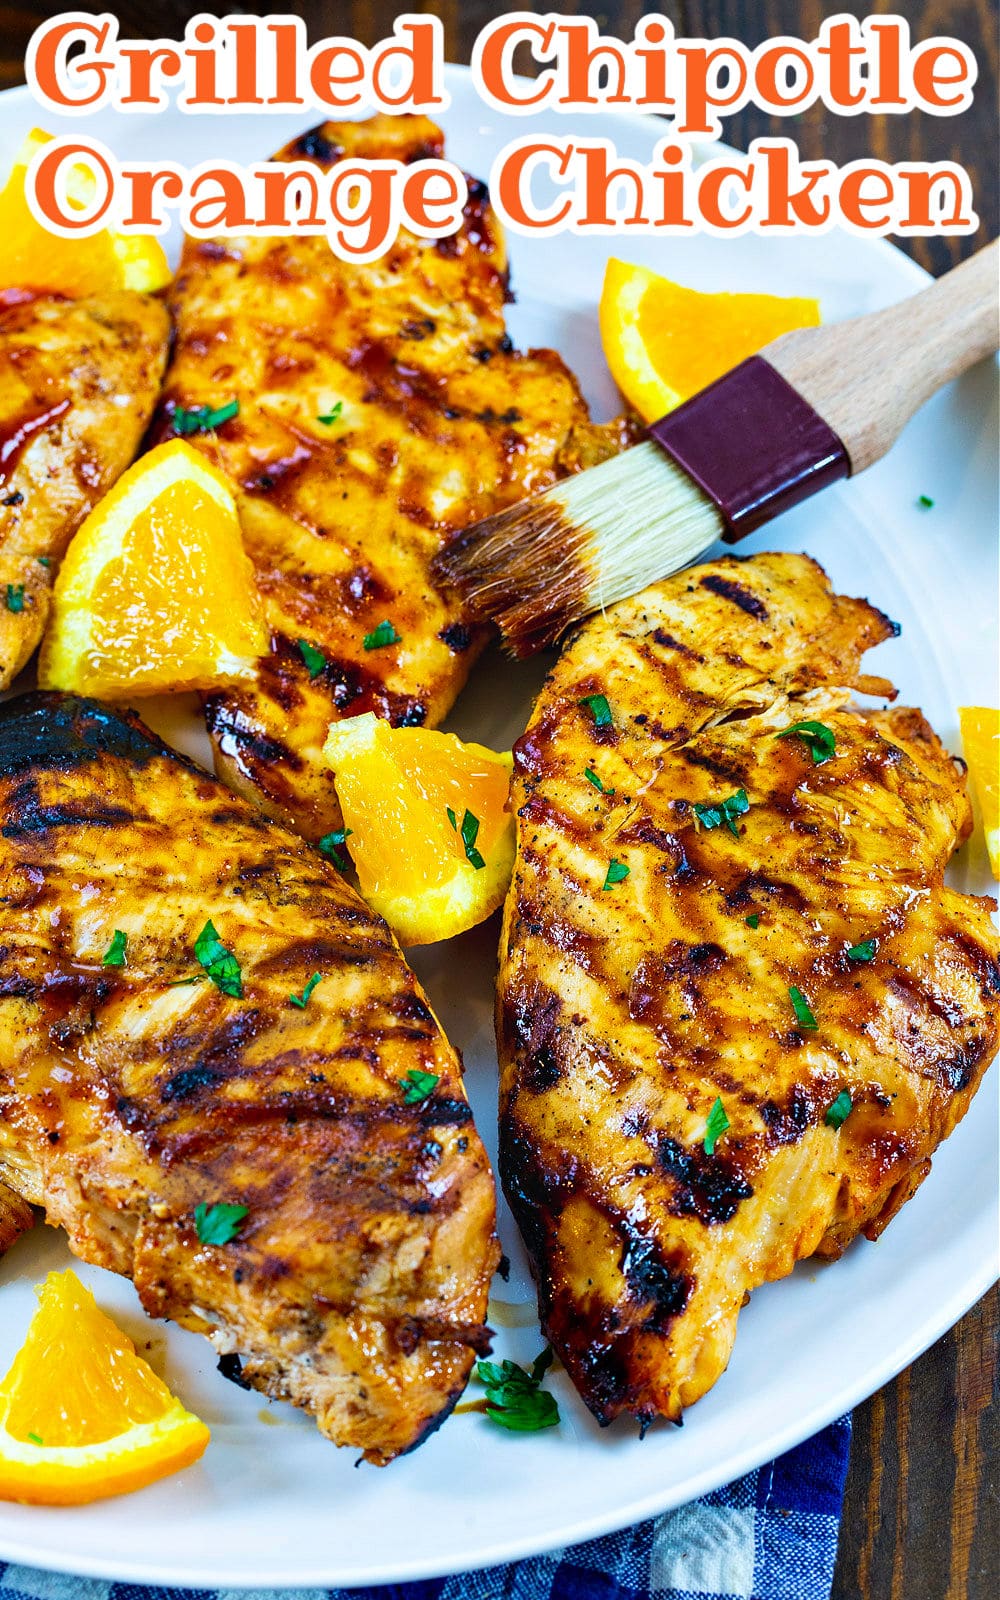 Grilled Chipotle Orange Chicken on a serving plate.